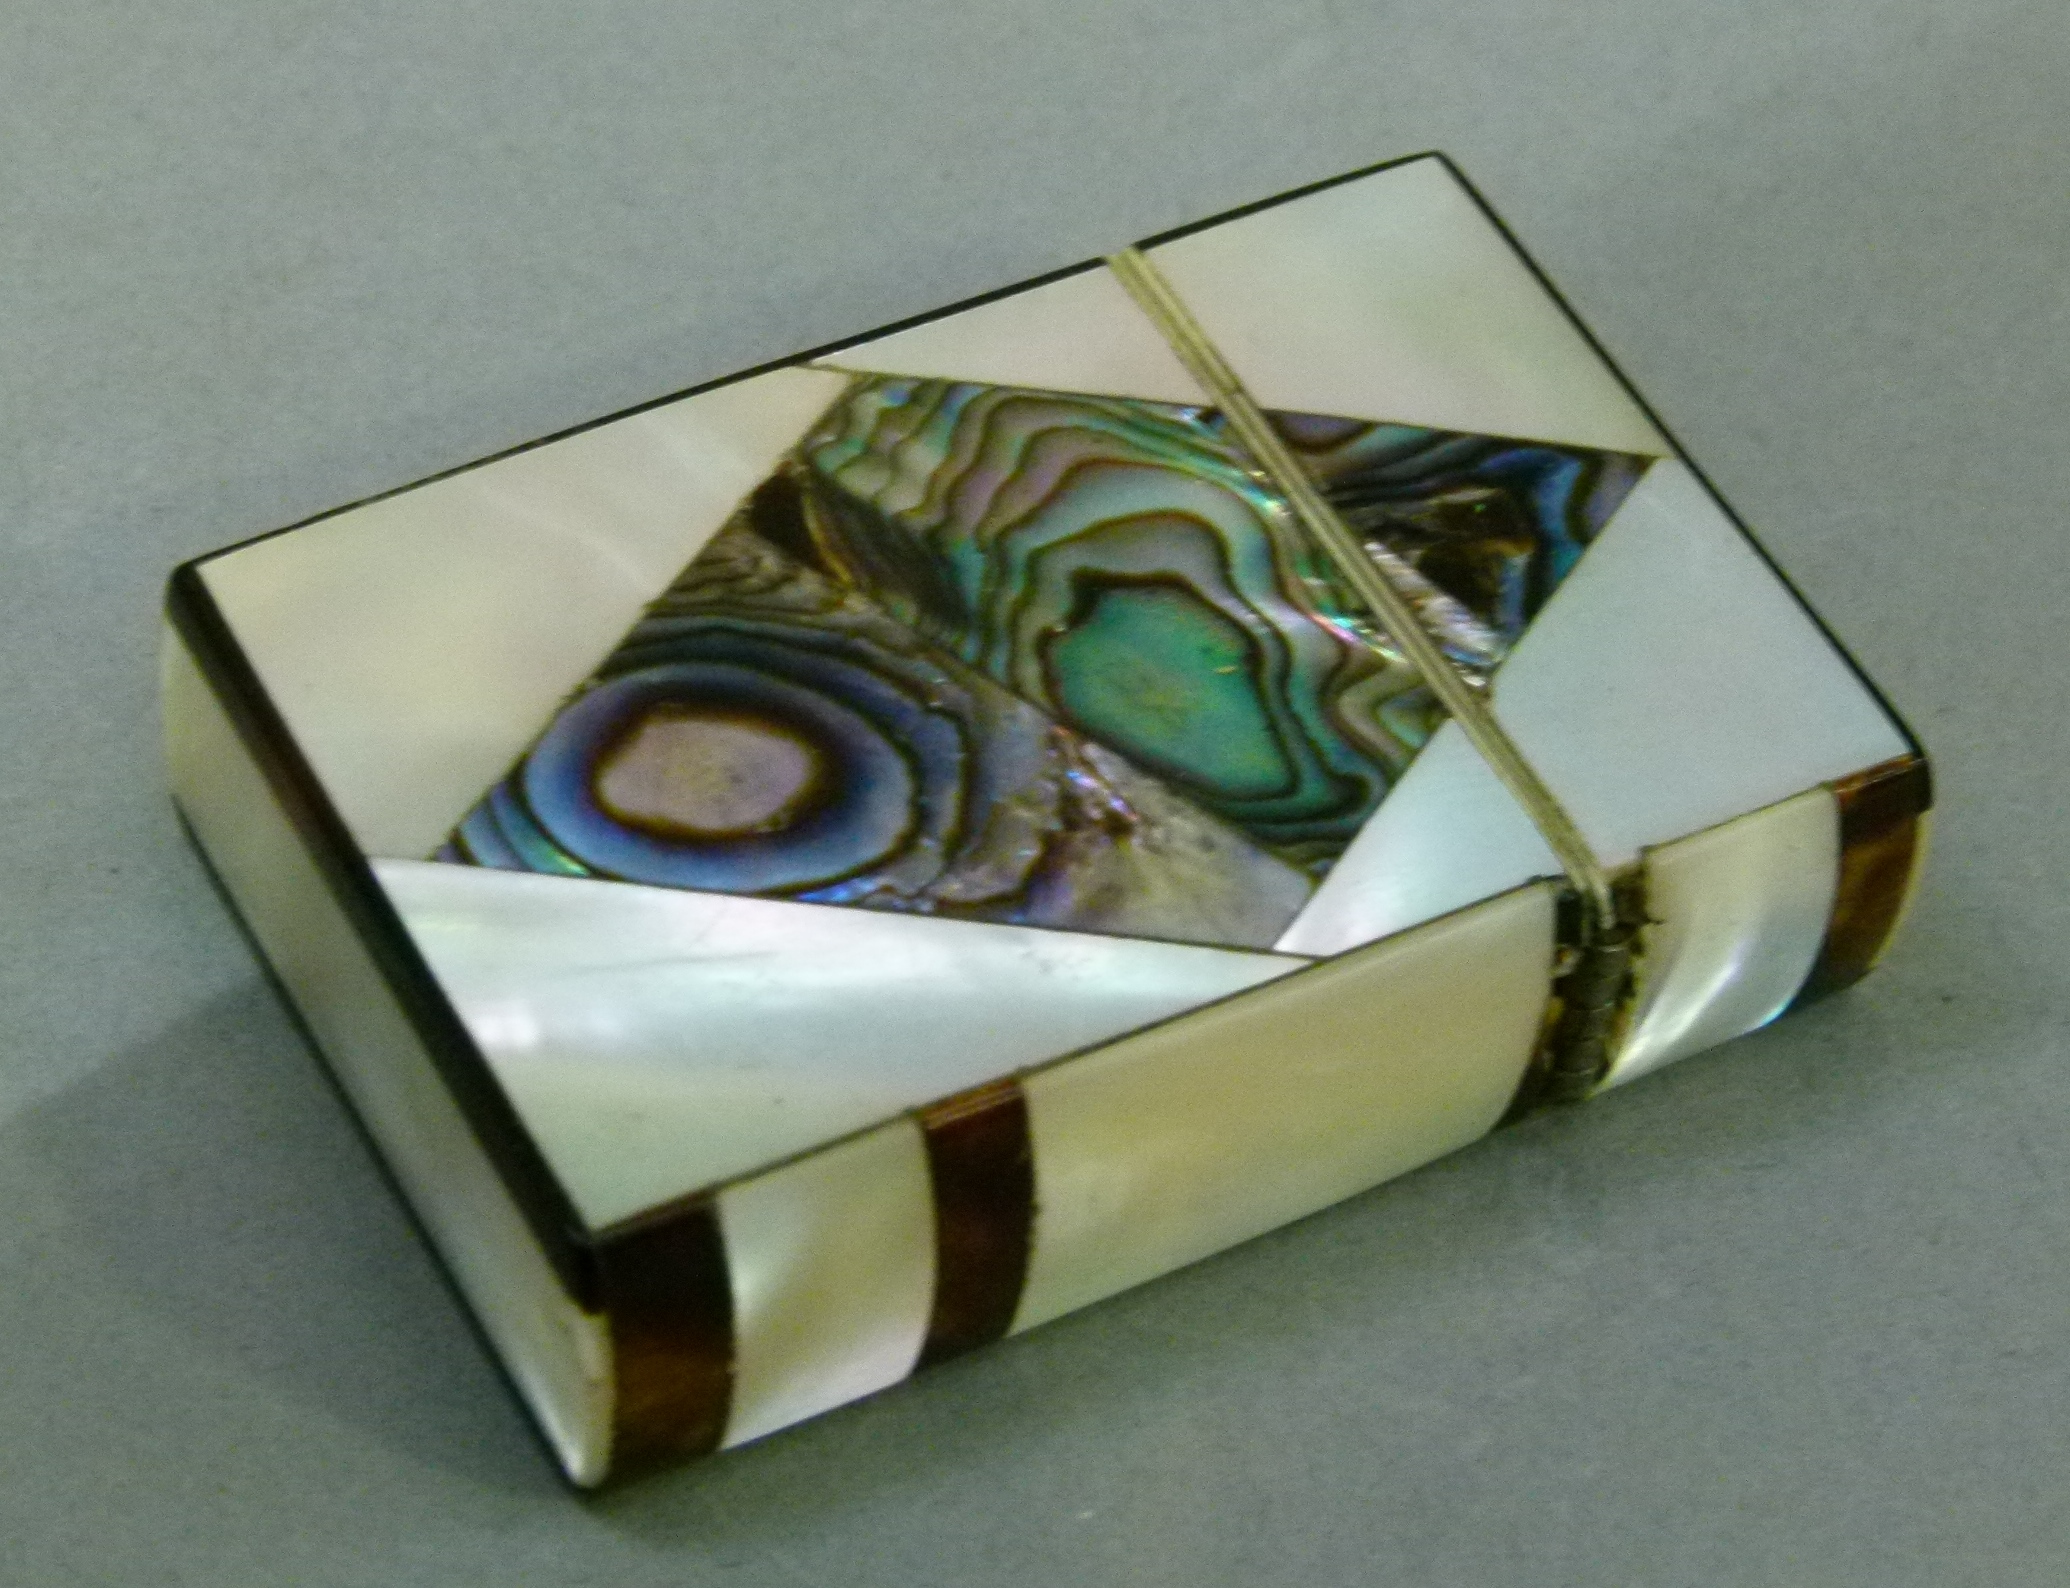 A 19th century miniature calling card case in mother-of-pearl, abalone and tortoiseshell, the - Image 4 of 4